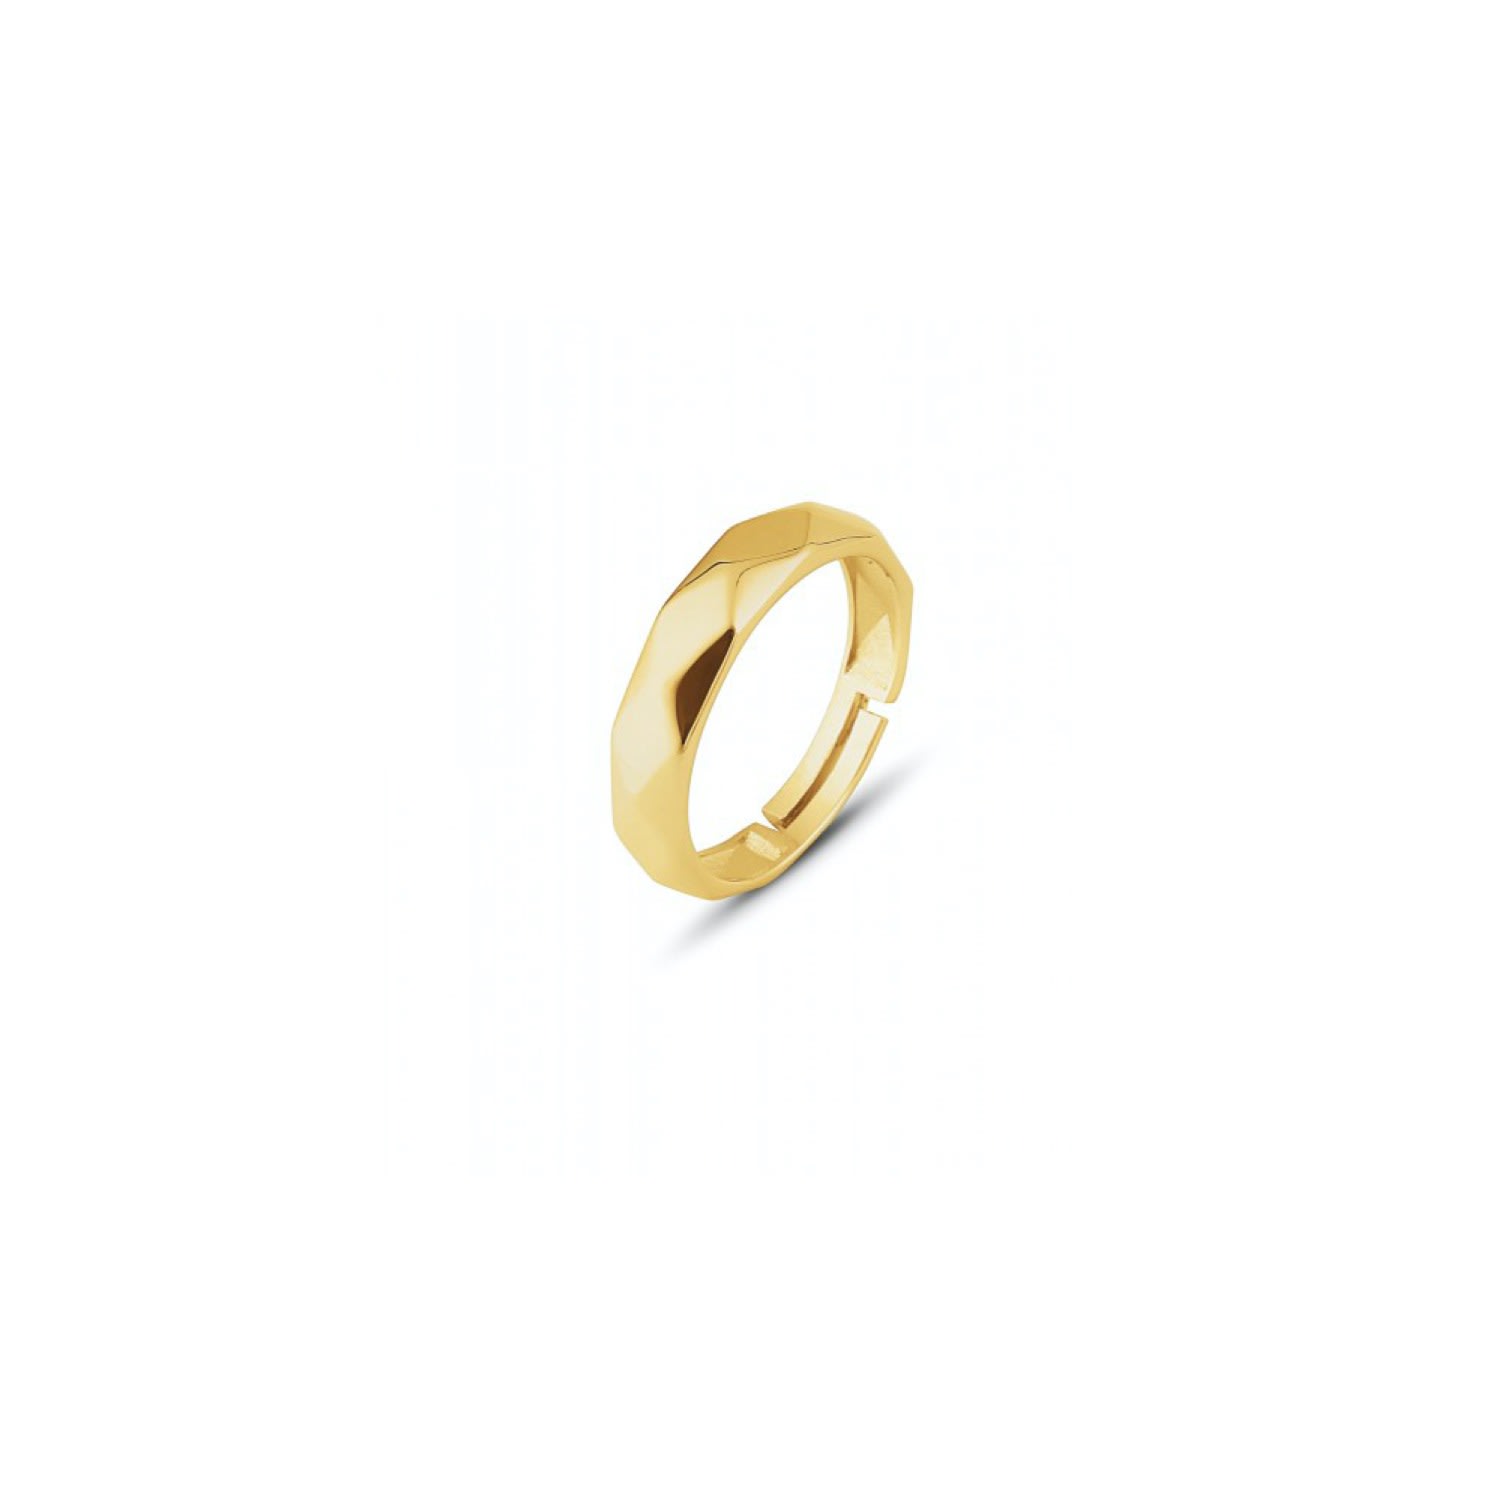 Spero London Women's Gold Sterling Silver Wide Hammered Ring